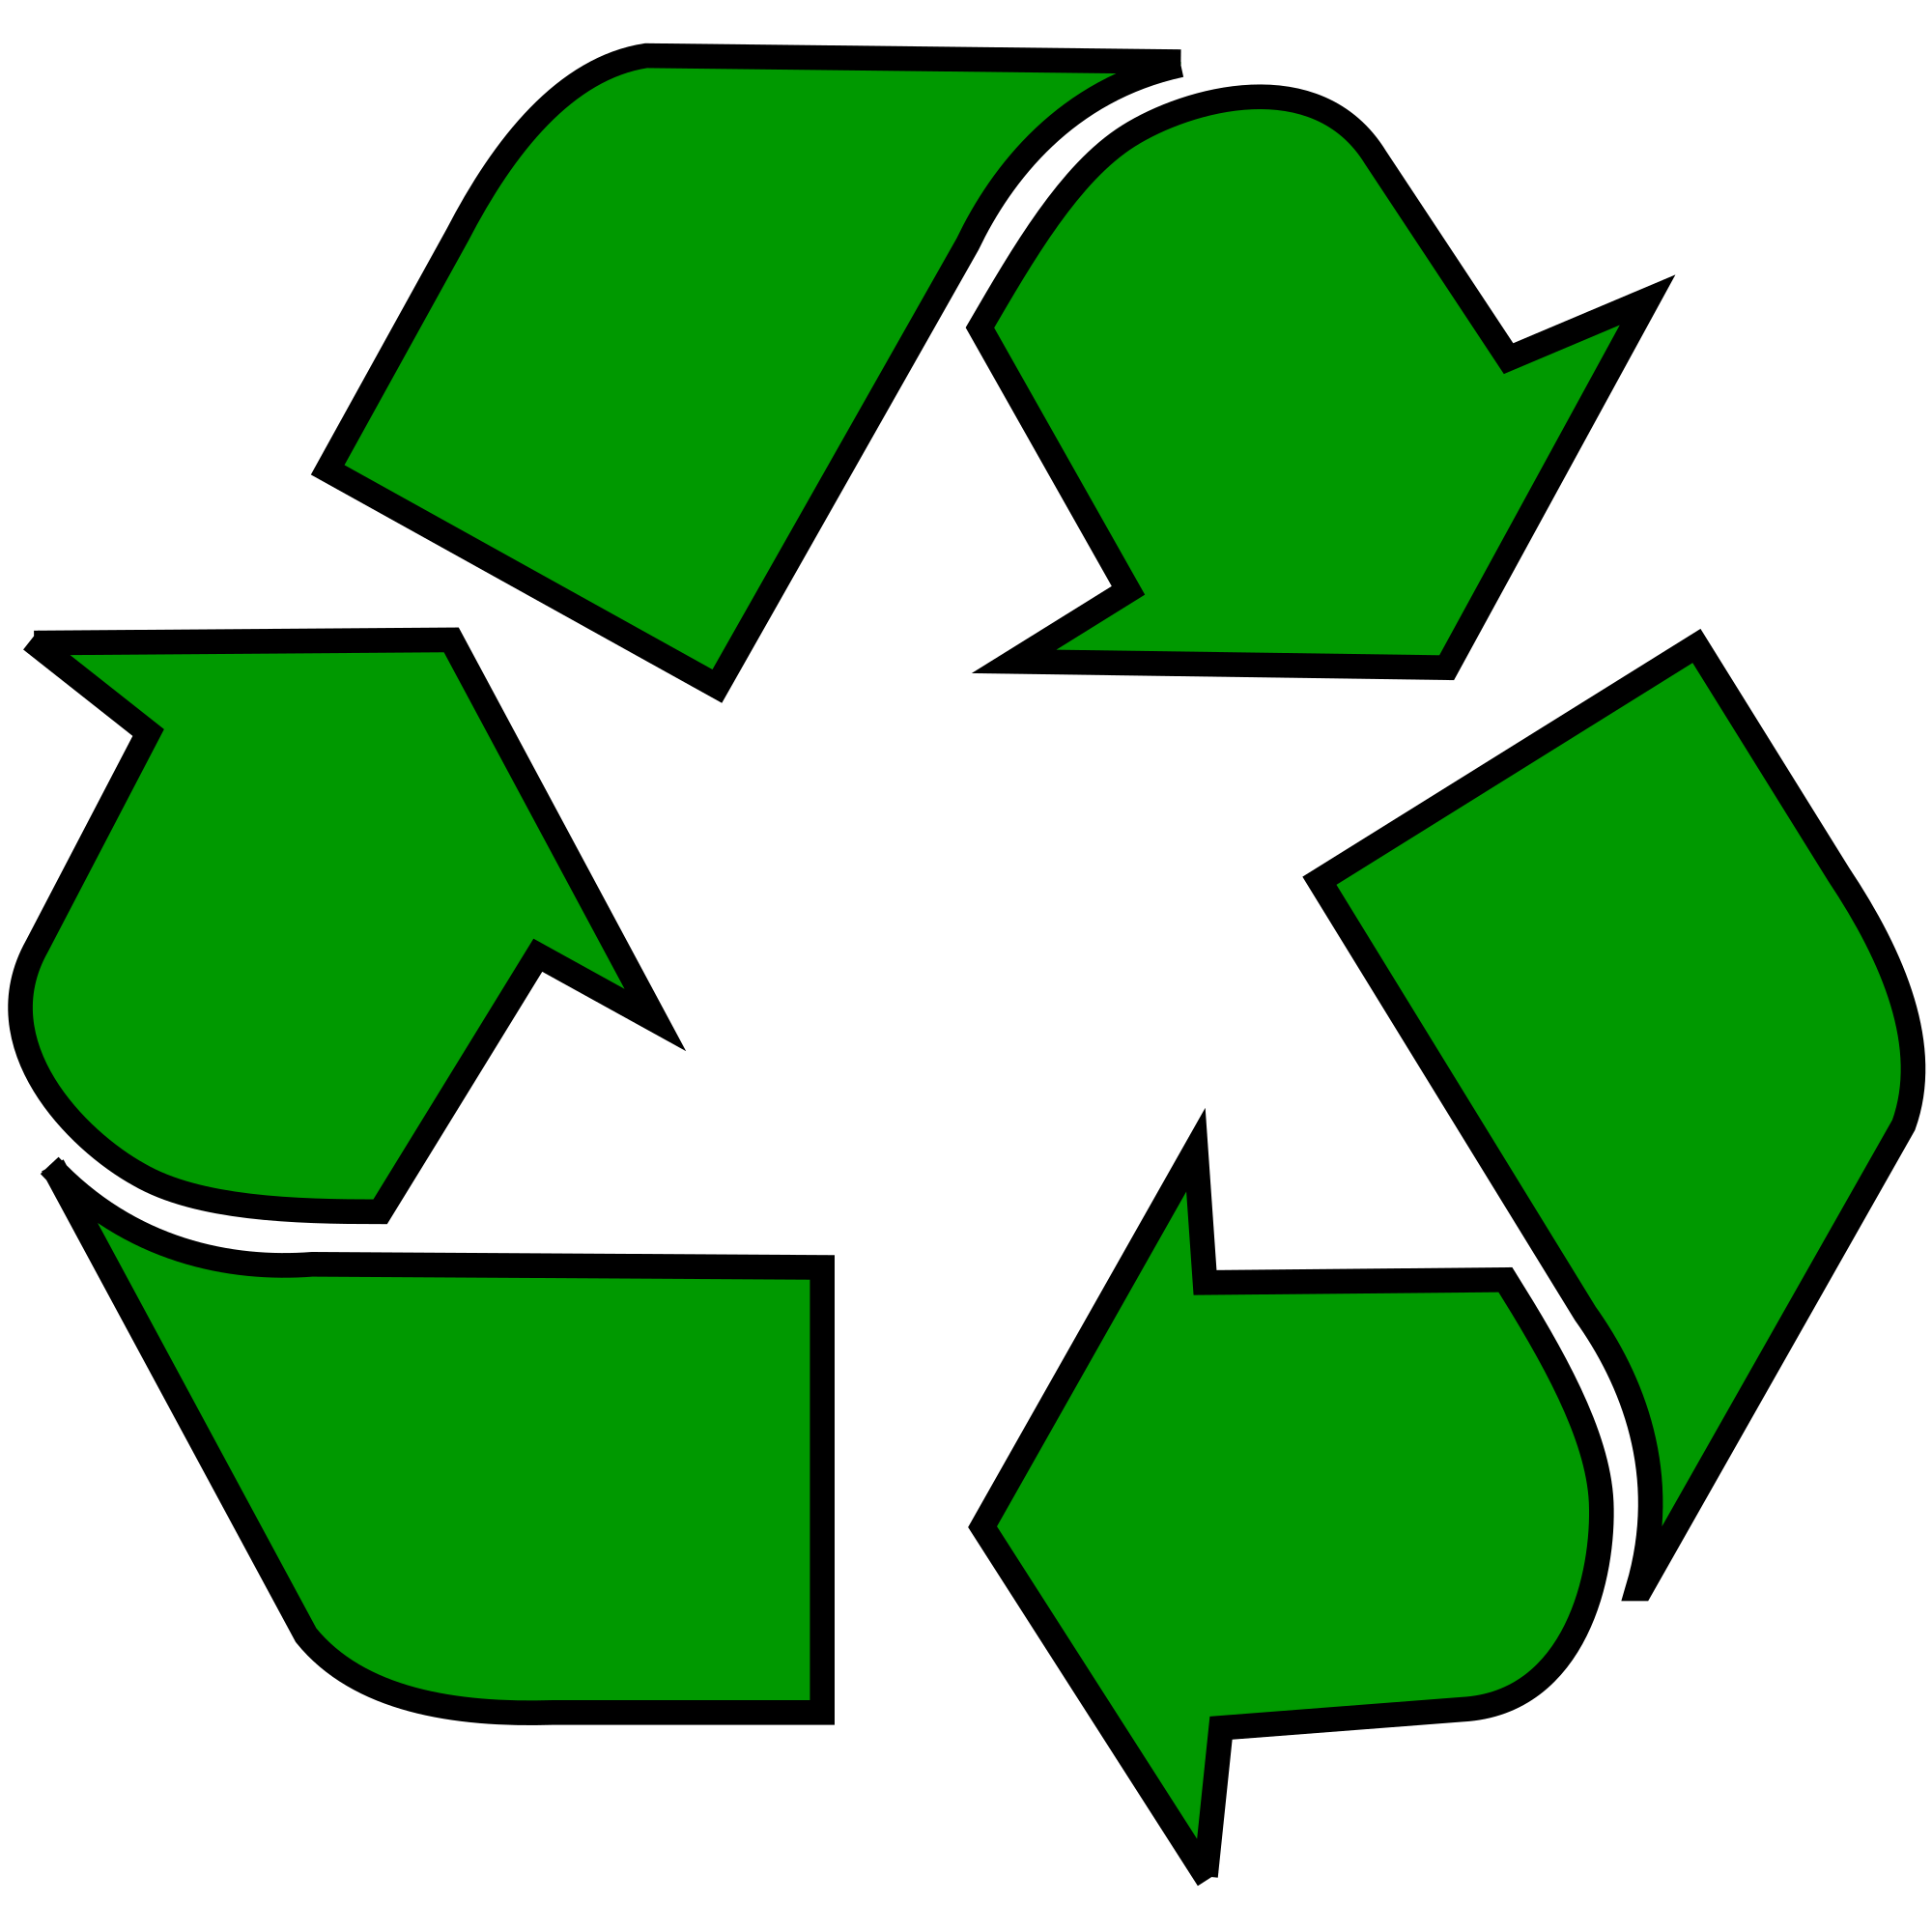 Blue Recycle Logo - Recycling symbol